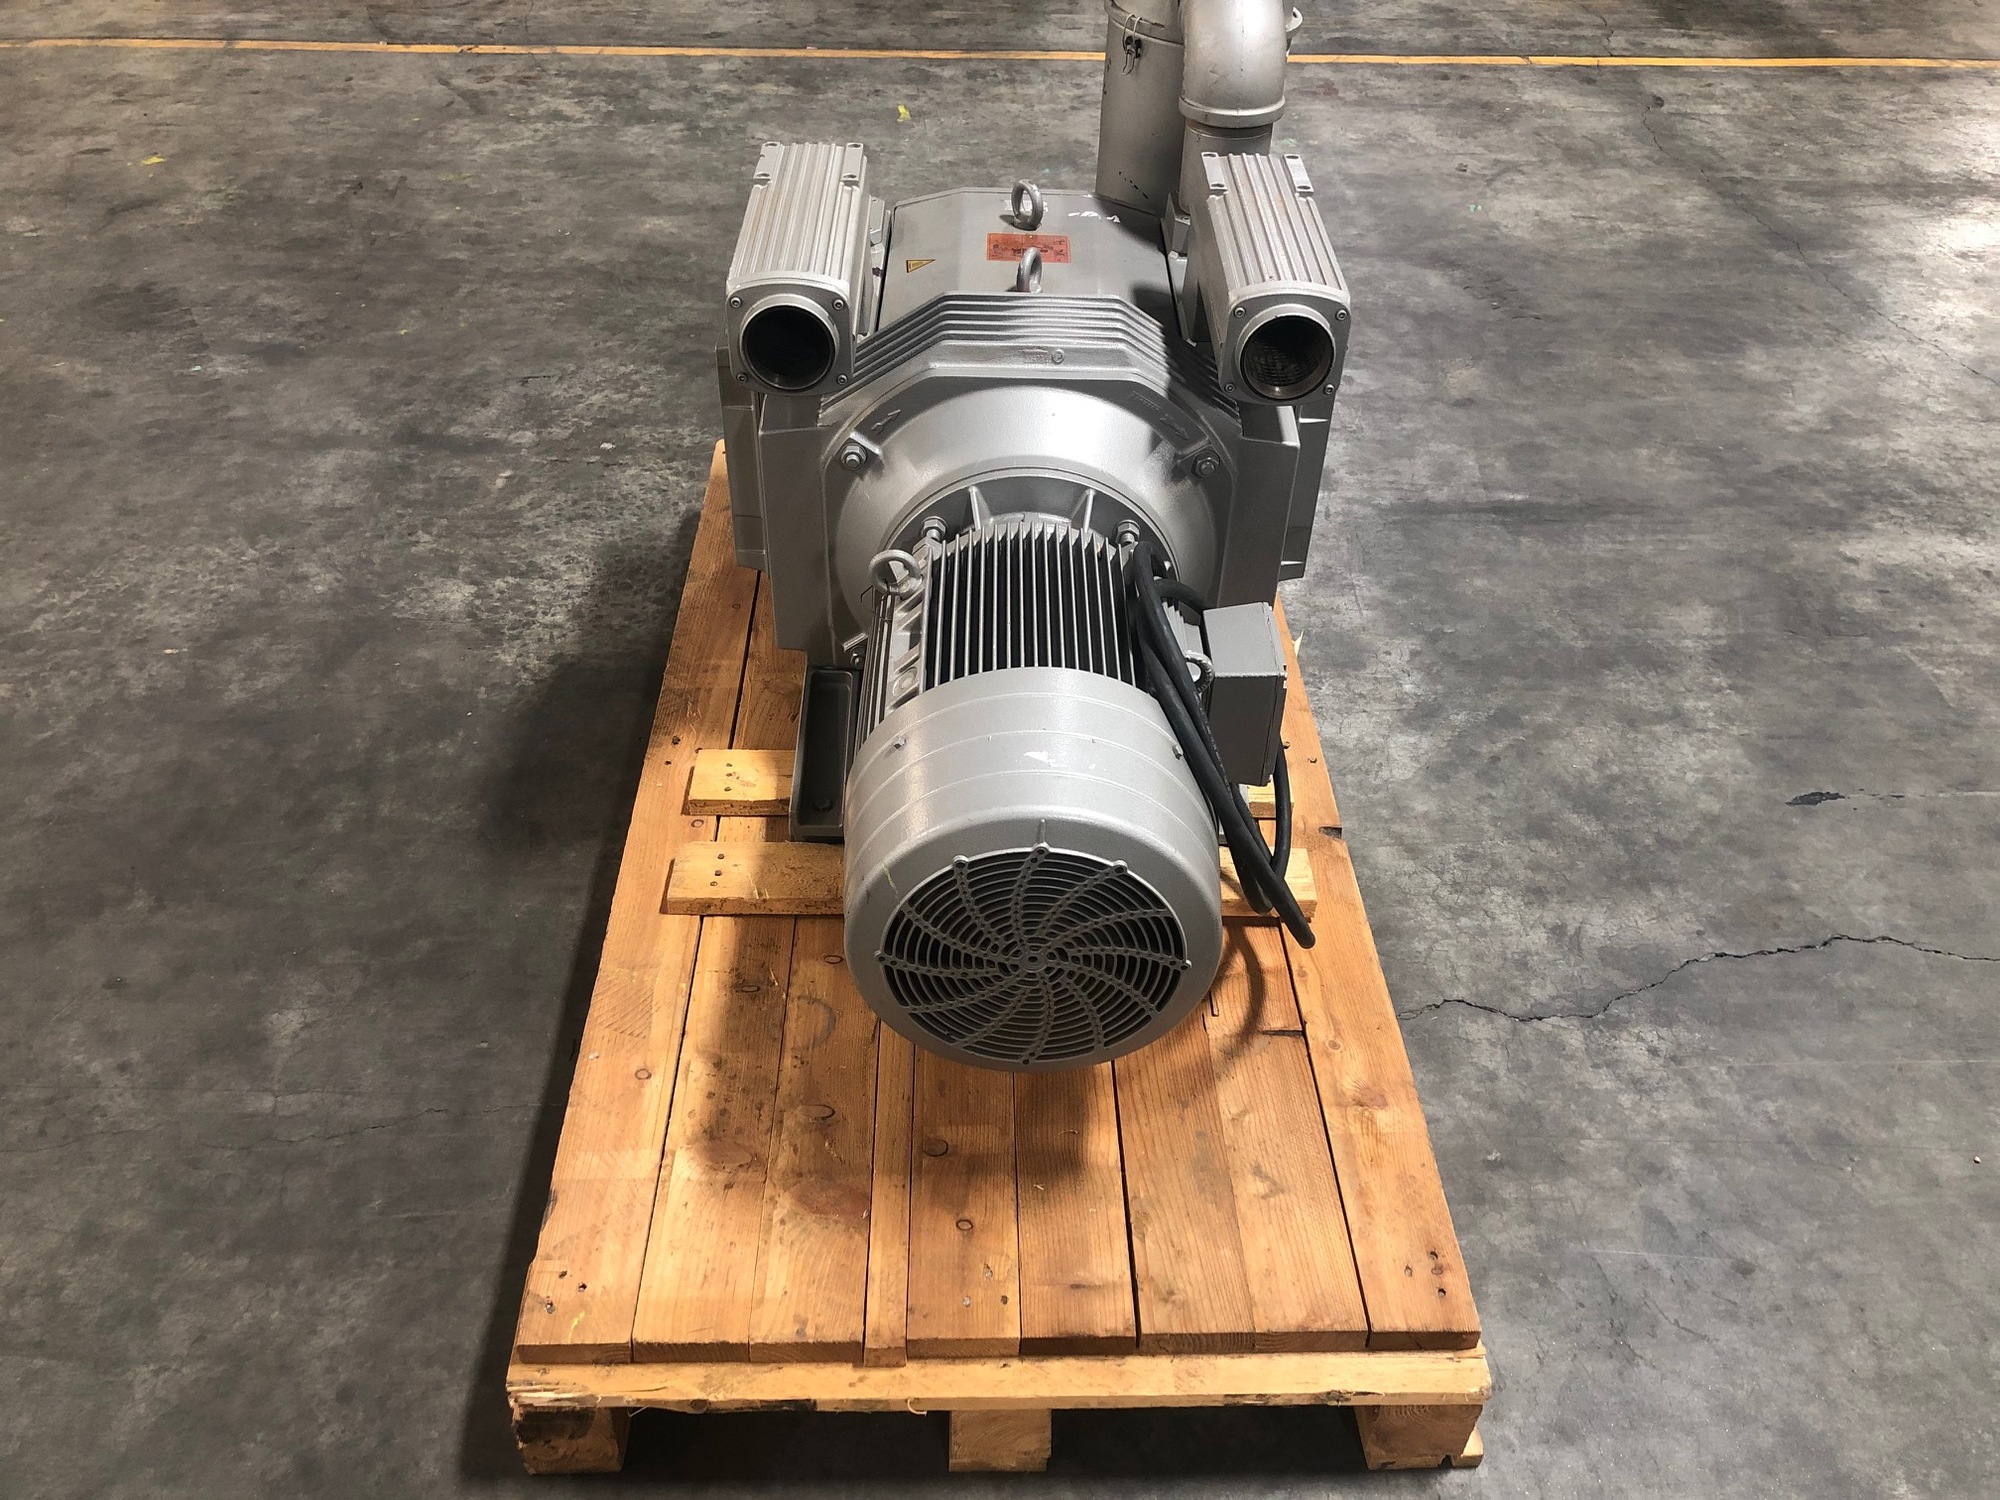 2011 Becker VTLF 2.400/0-79 Used Vacuum Pumps | CNC Router Store